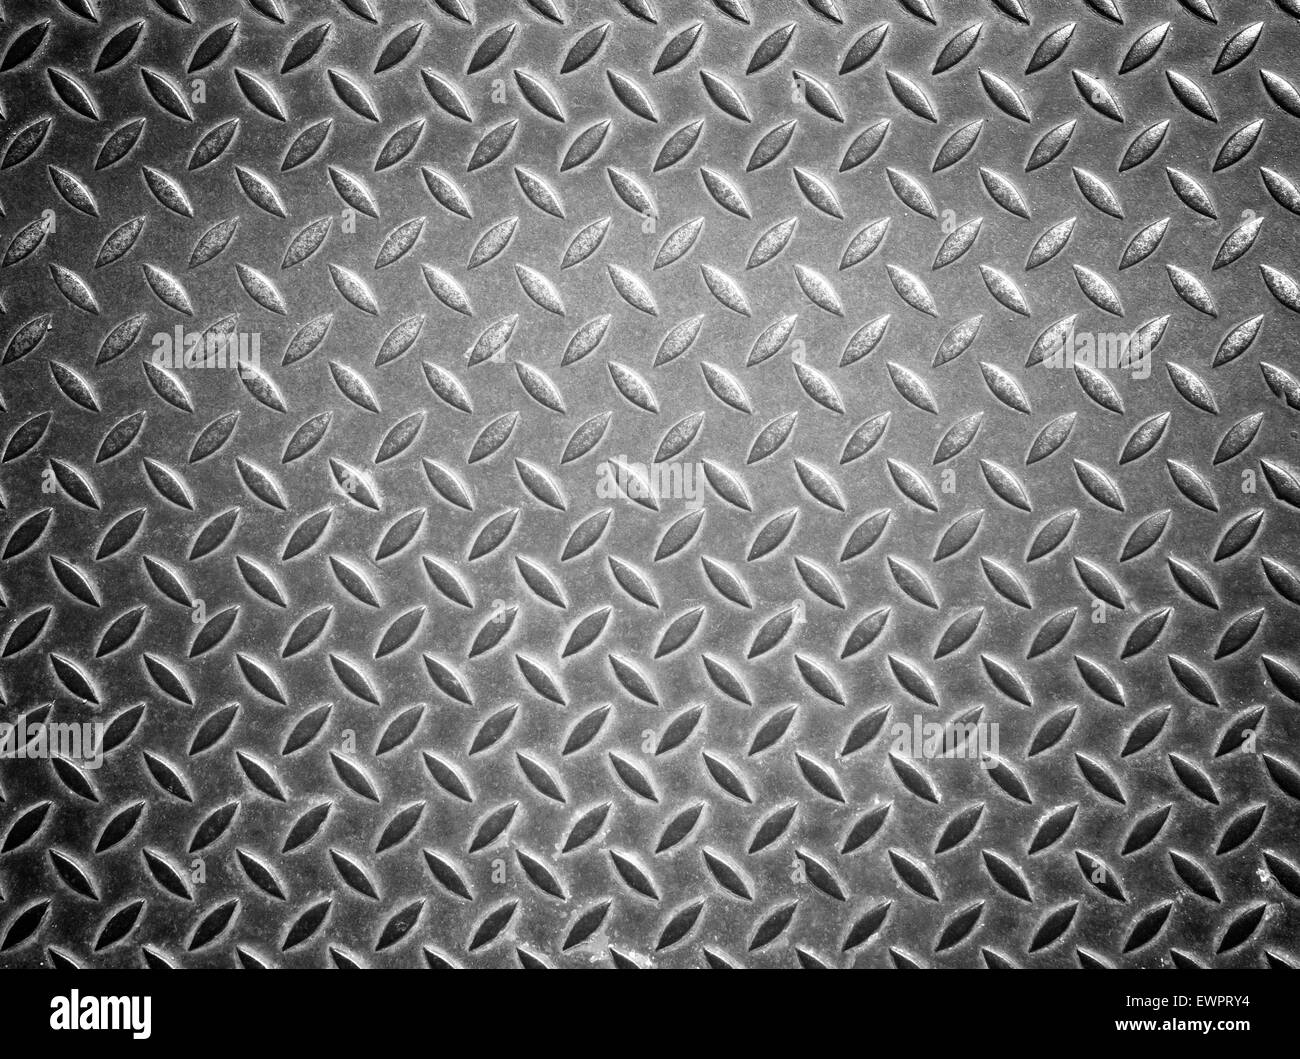 Background of metal diamond plate in silver color. Stock Photo